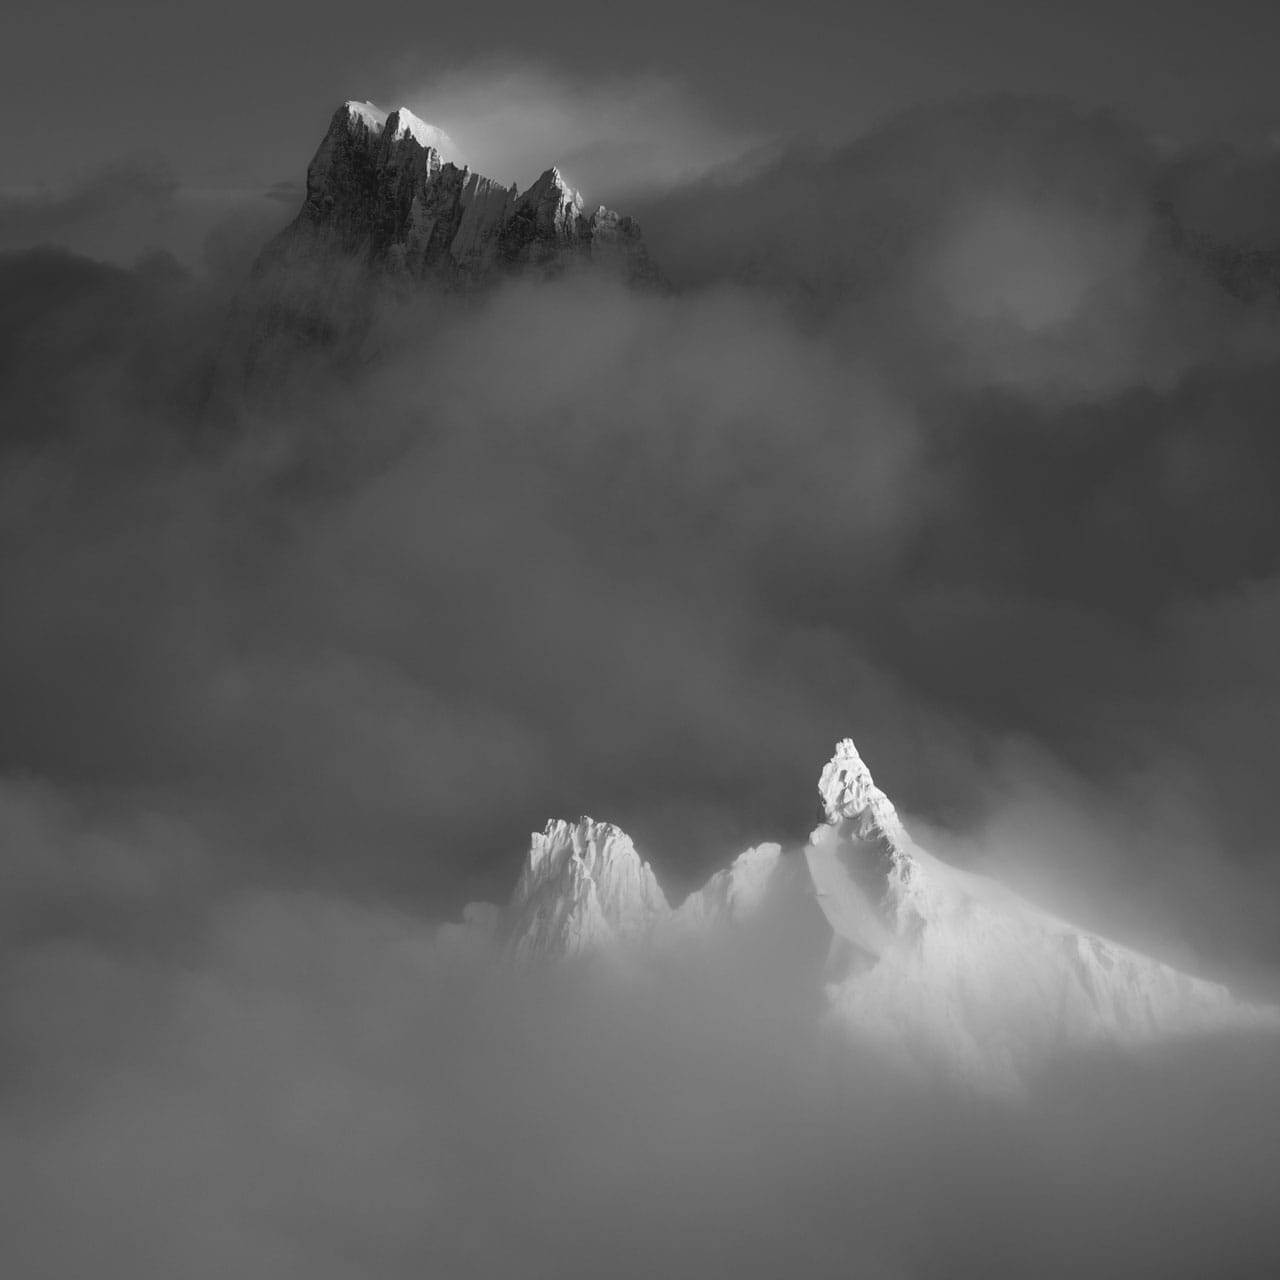 artistic black and whiter mountain image Mont Blanc massif